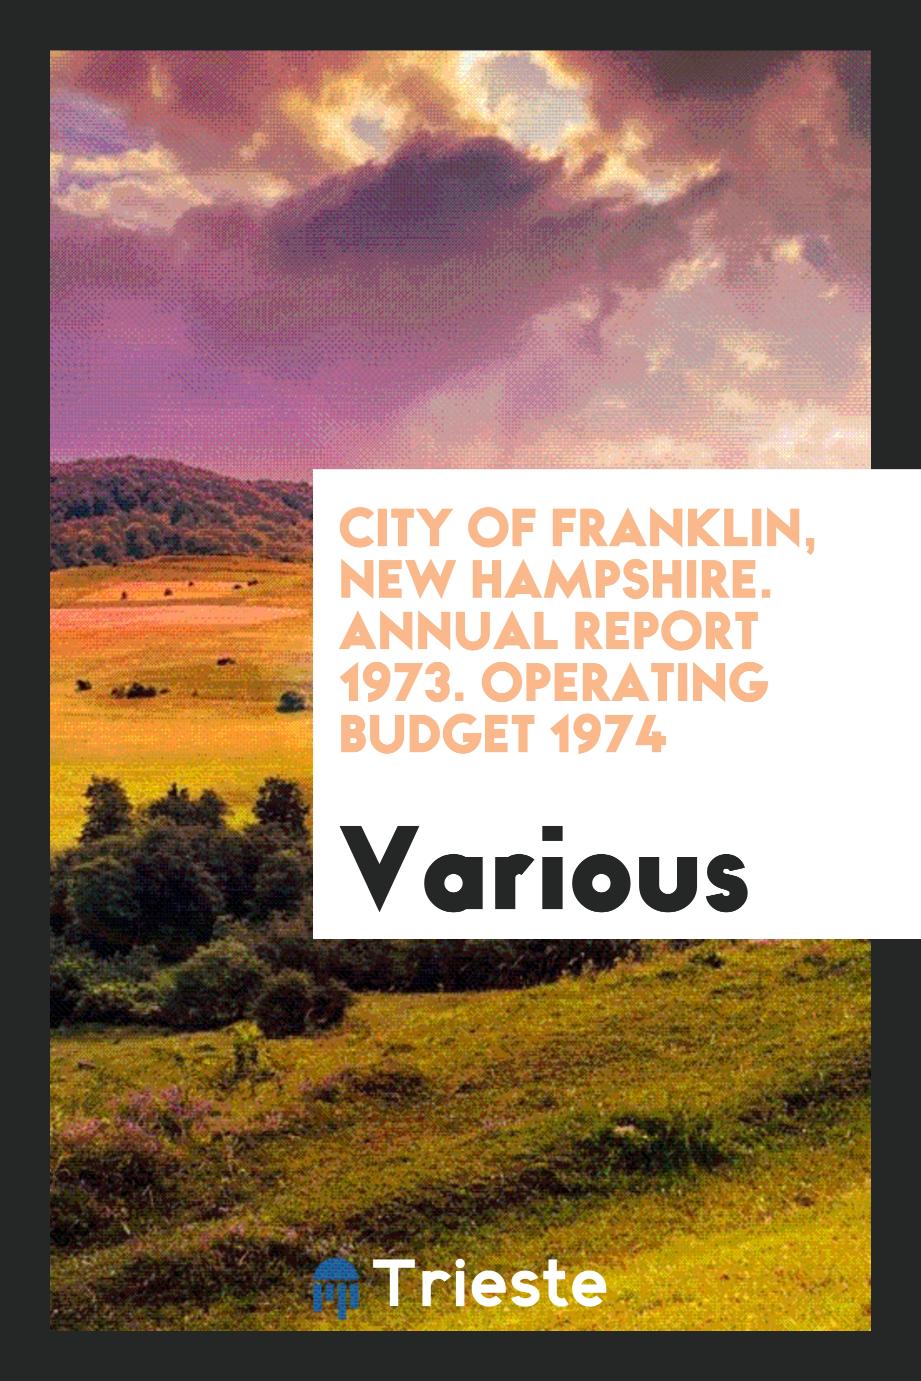 City of Franklin, New Hampshire. Annual Report 1973. Operating Budget 1974